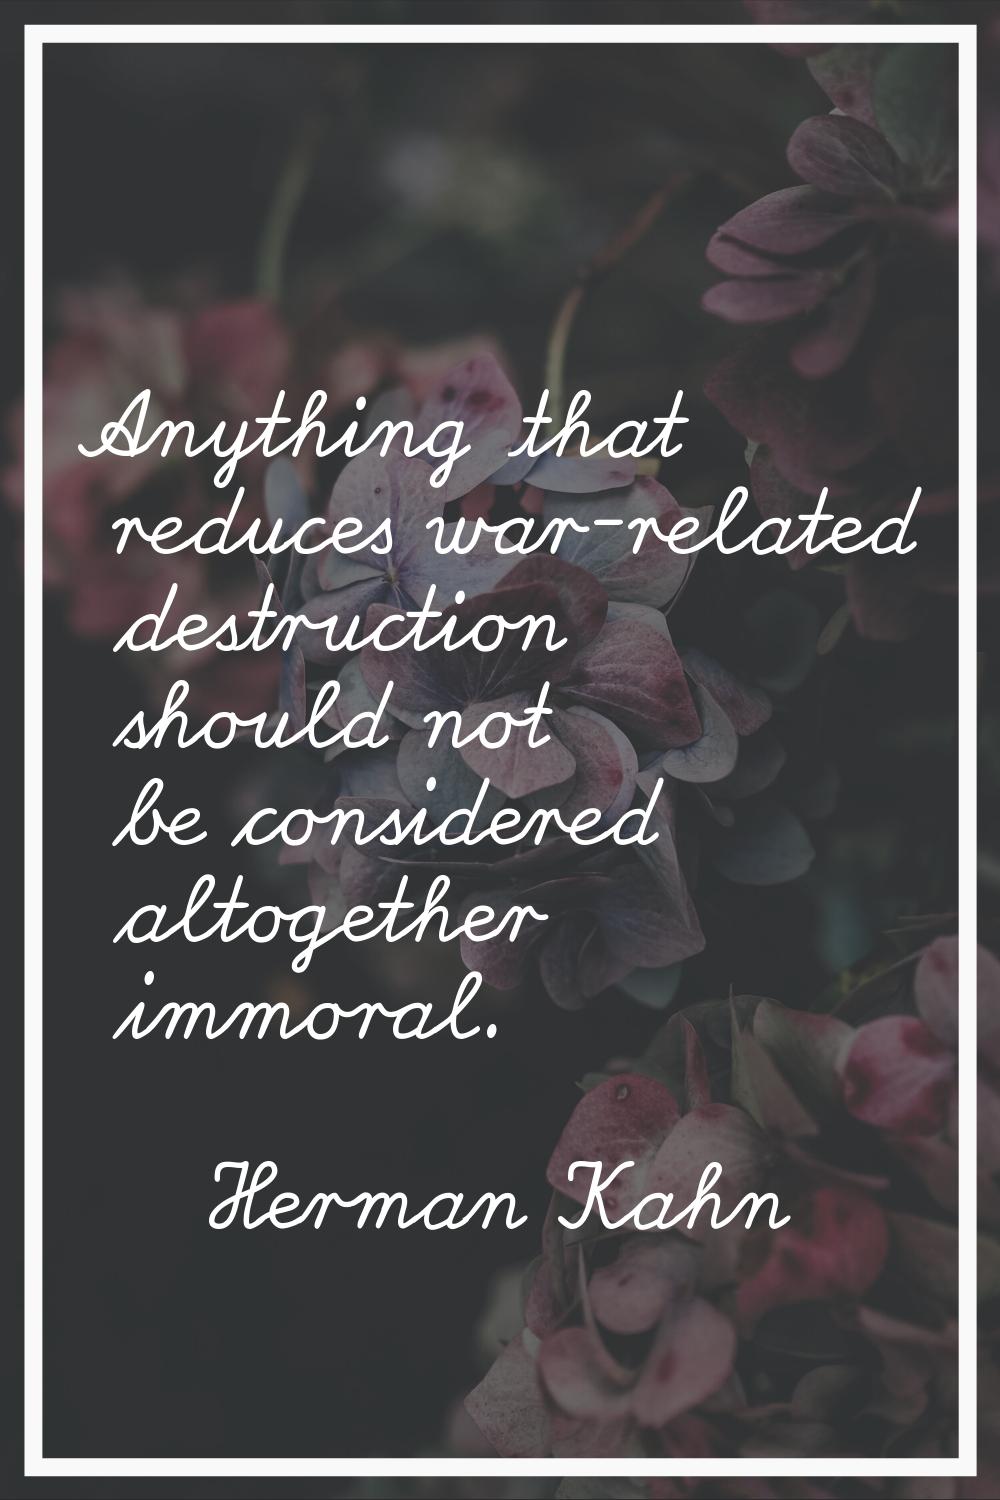 Anything that reduces war-related destruction should not be considered altogether immoral.